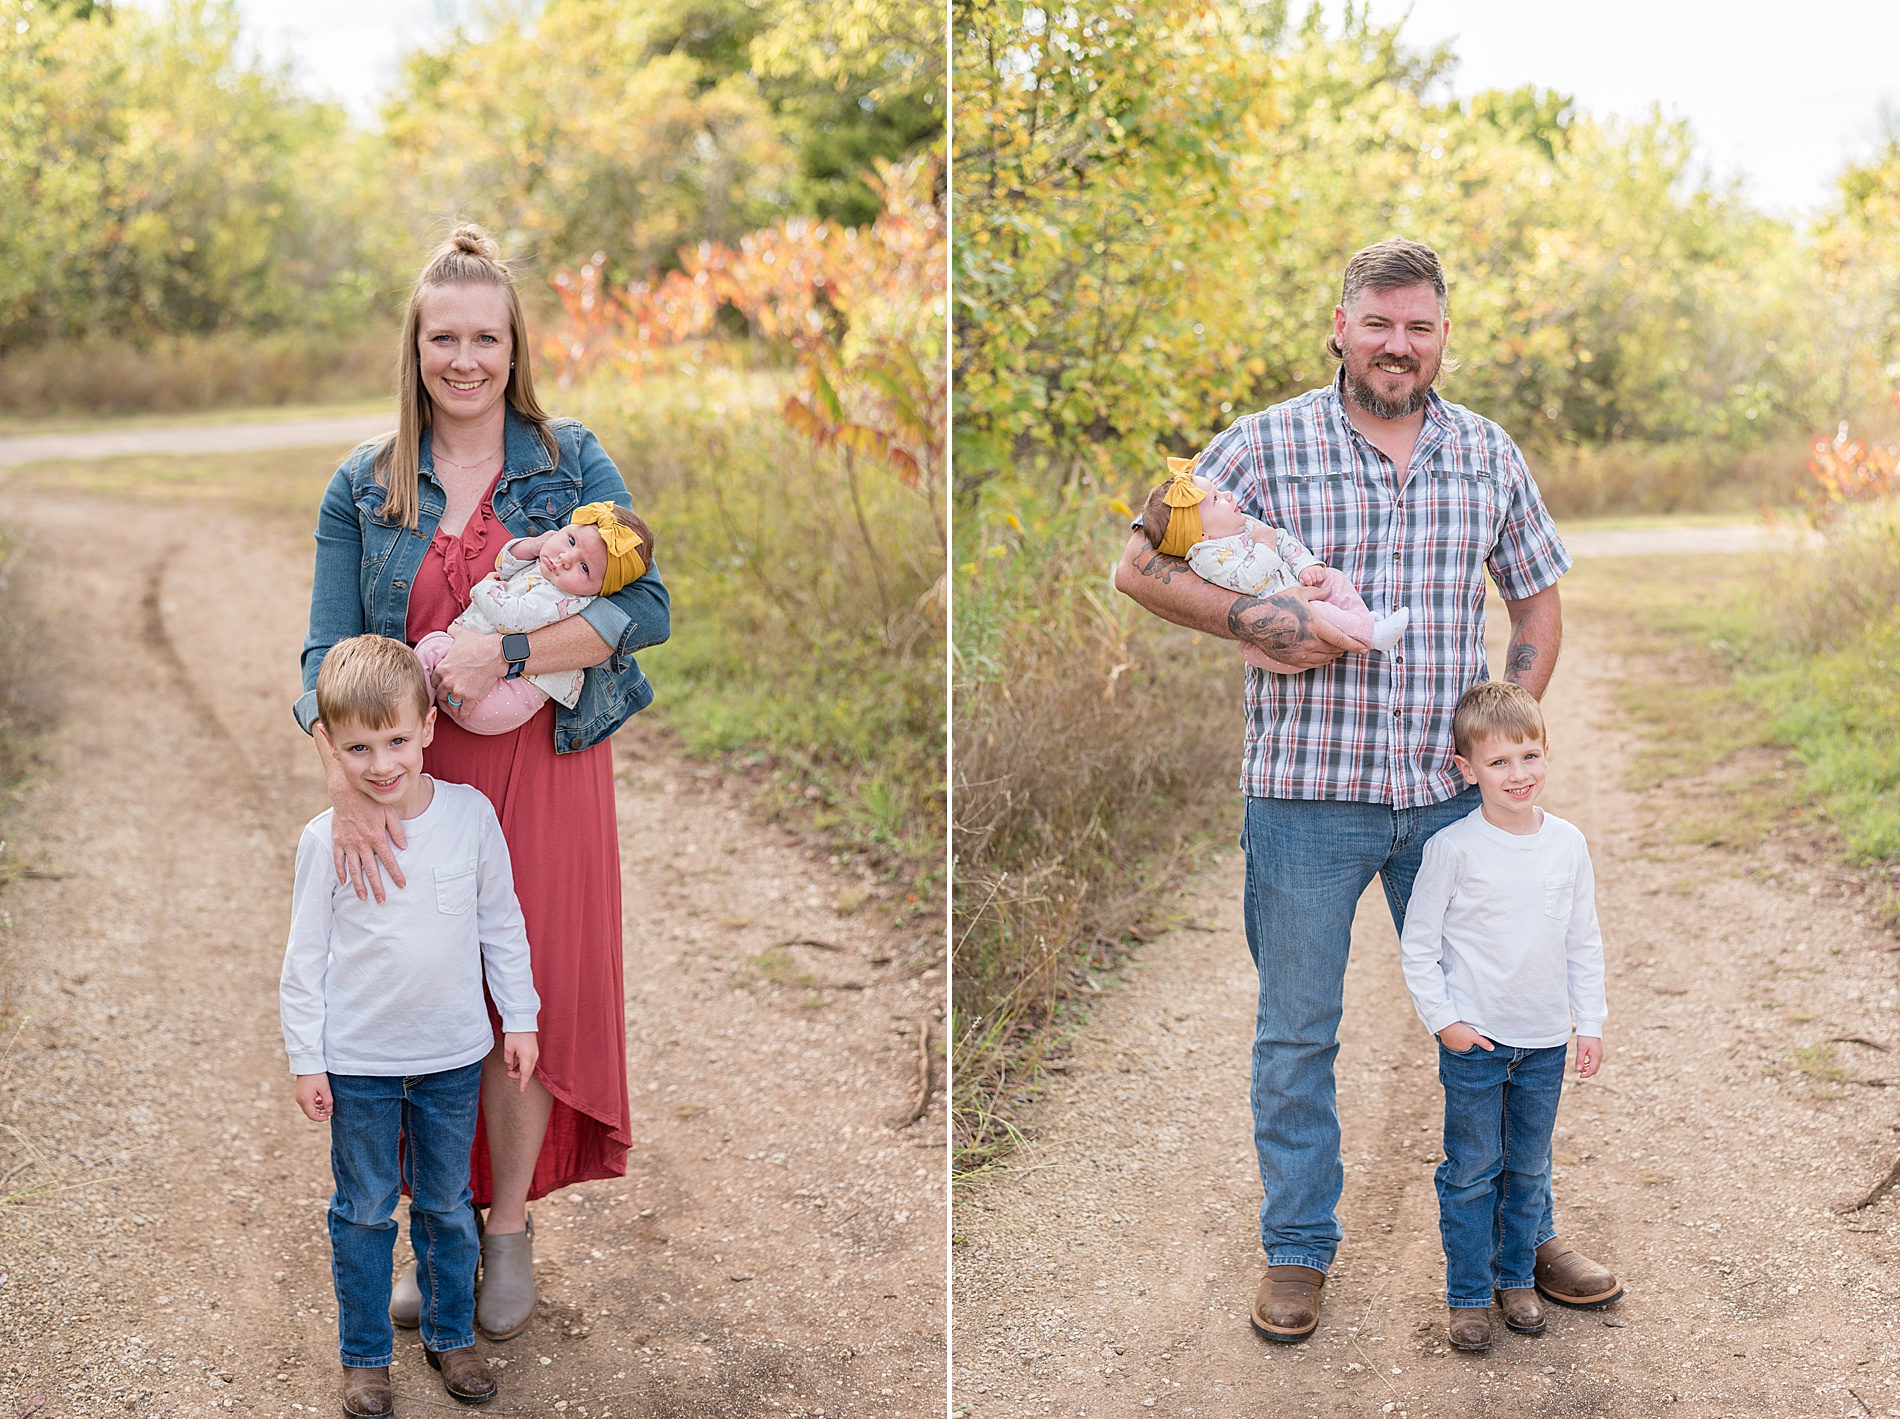 mom and dad take turns in photos with their two kids